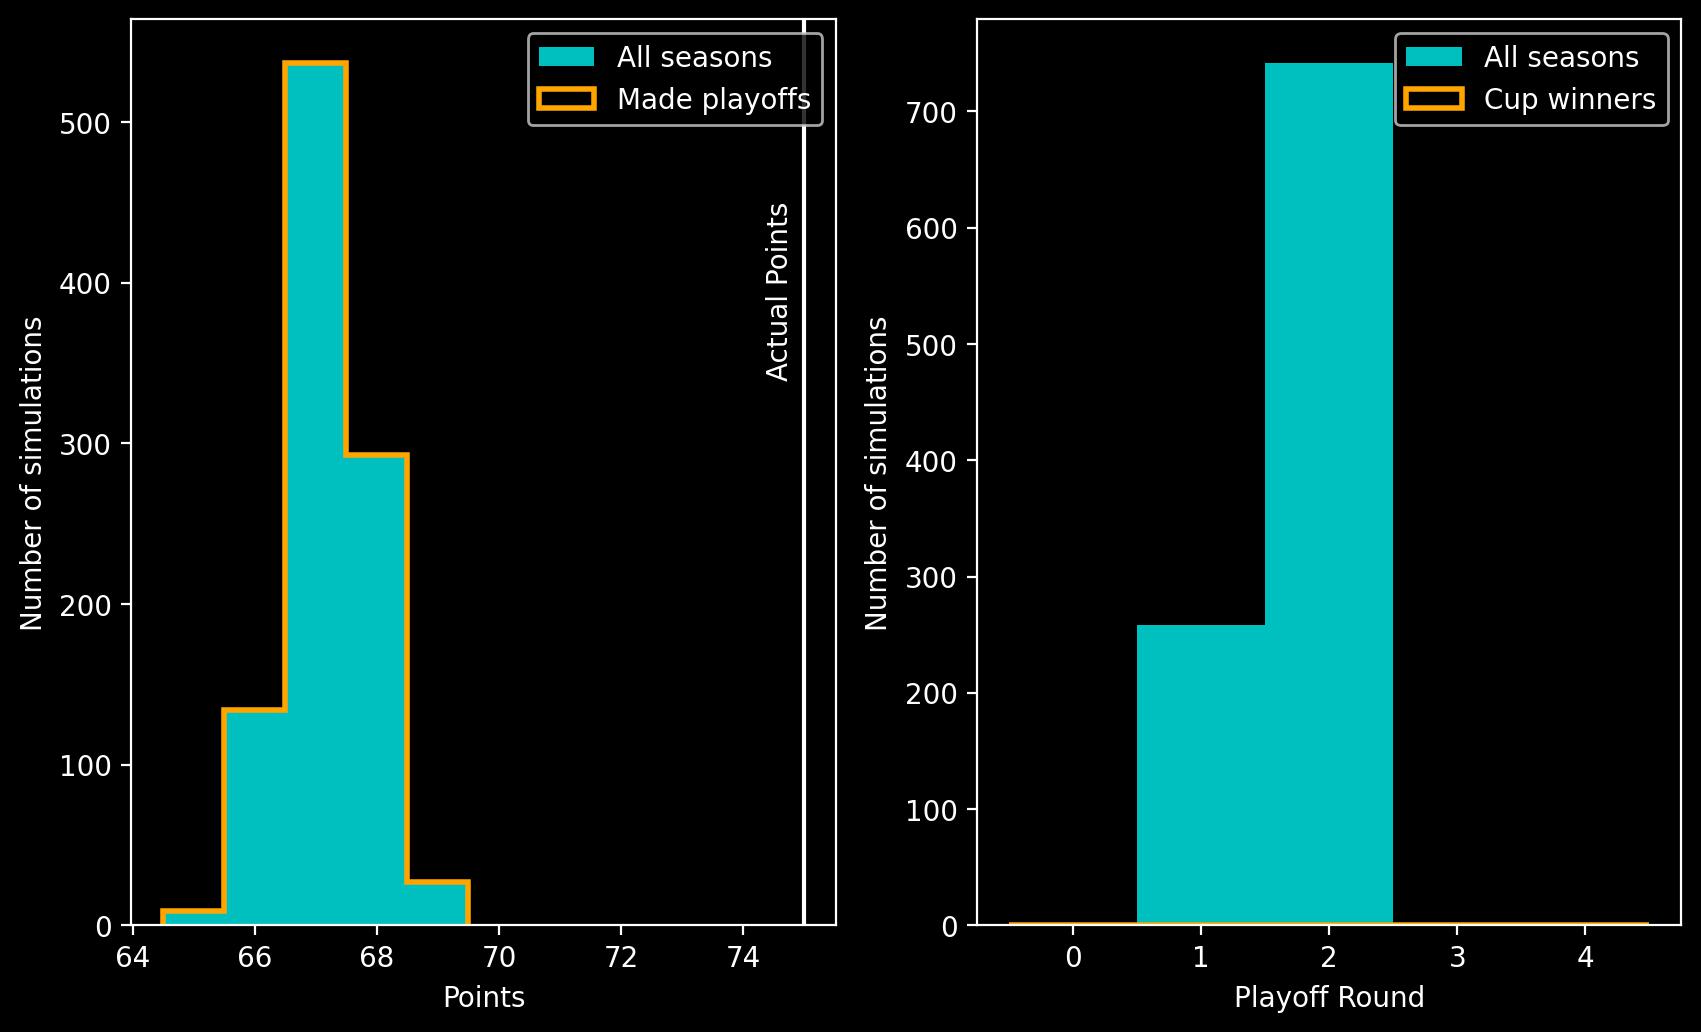 Two panel plot showing histograms. Left panel shows a histogram of points on the x-axis against number of simulations on the y-axis, the peak is at 67 points. Right panel shows playoff round on the x-axis against number of simulations on the y-axis. The largest bar is at playoff round 2.